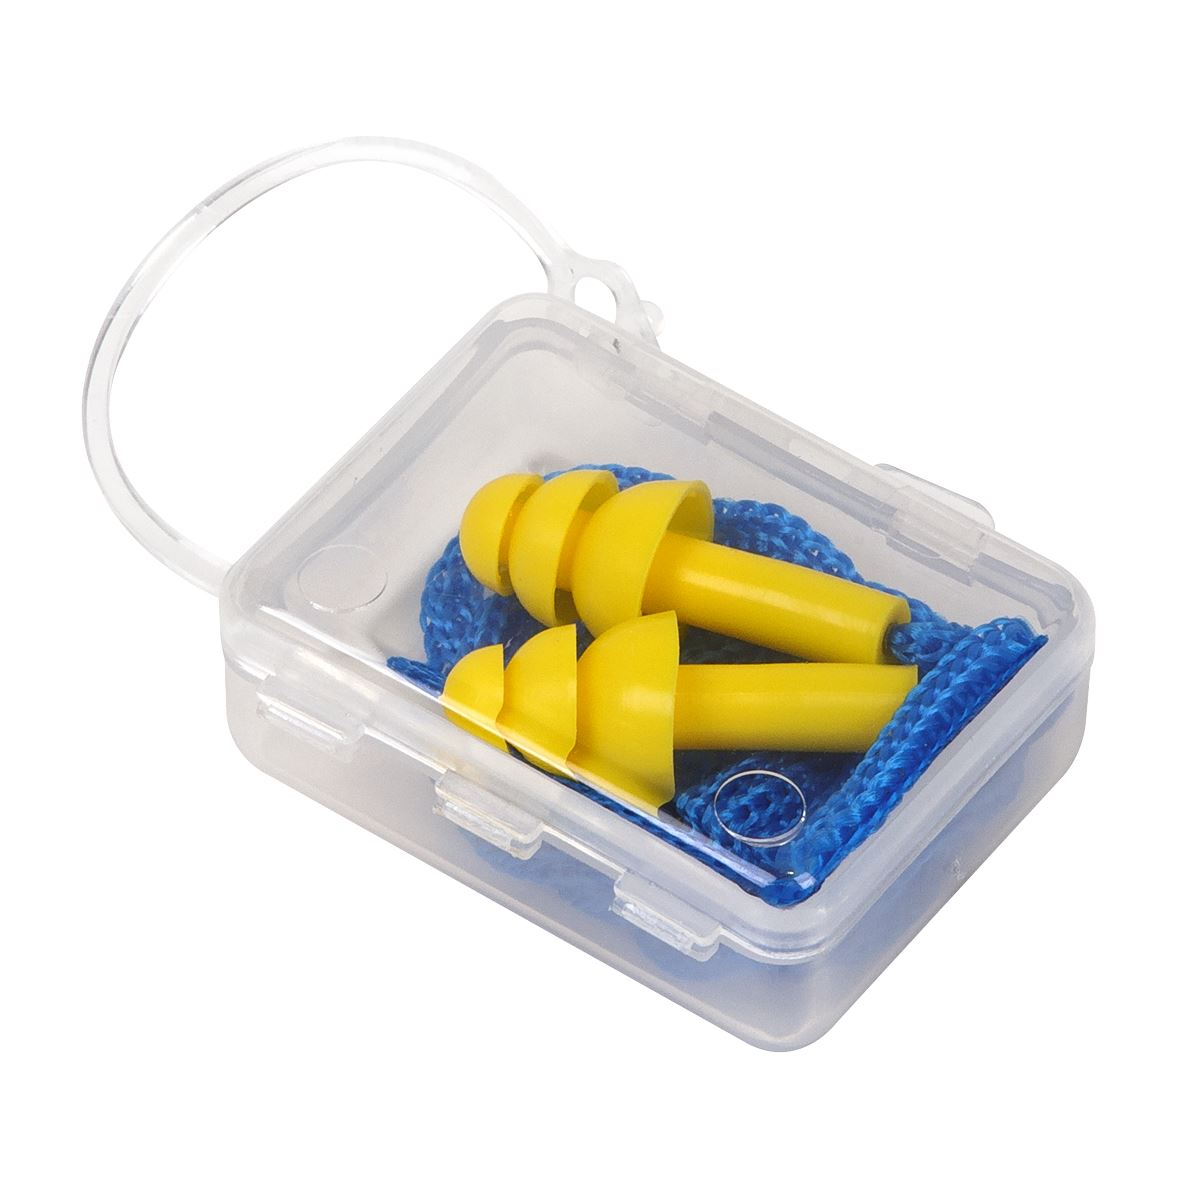 Worksafe by Sealey Ear Plugs Disposable Corded Pack of 50 Pairs